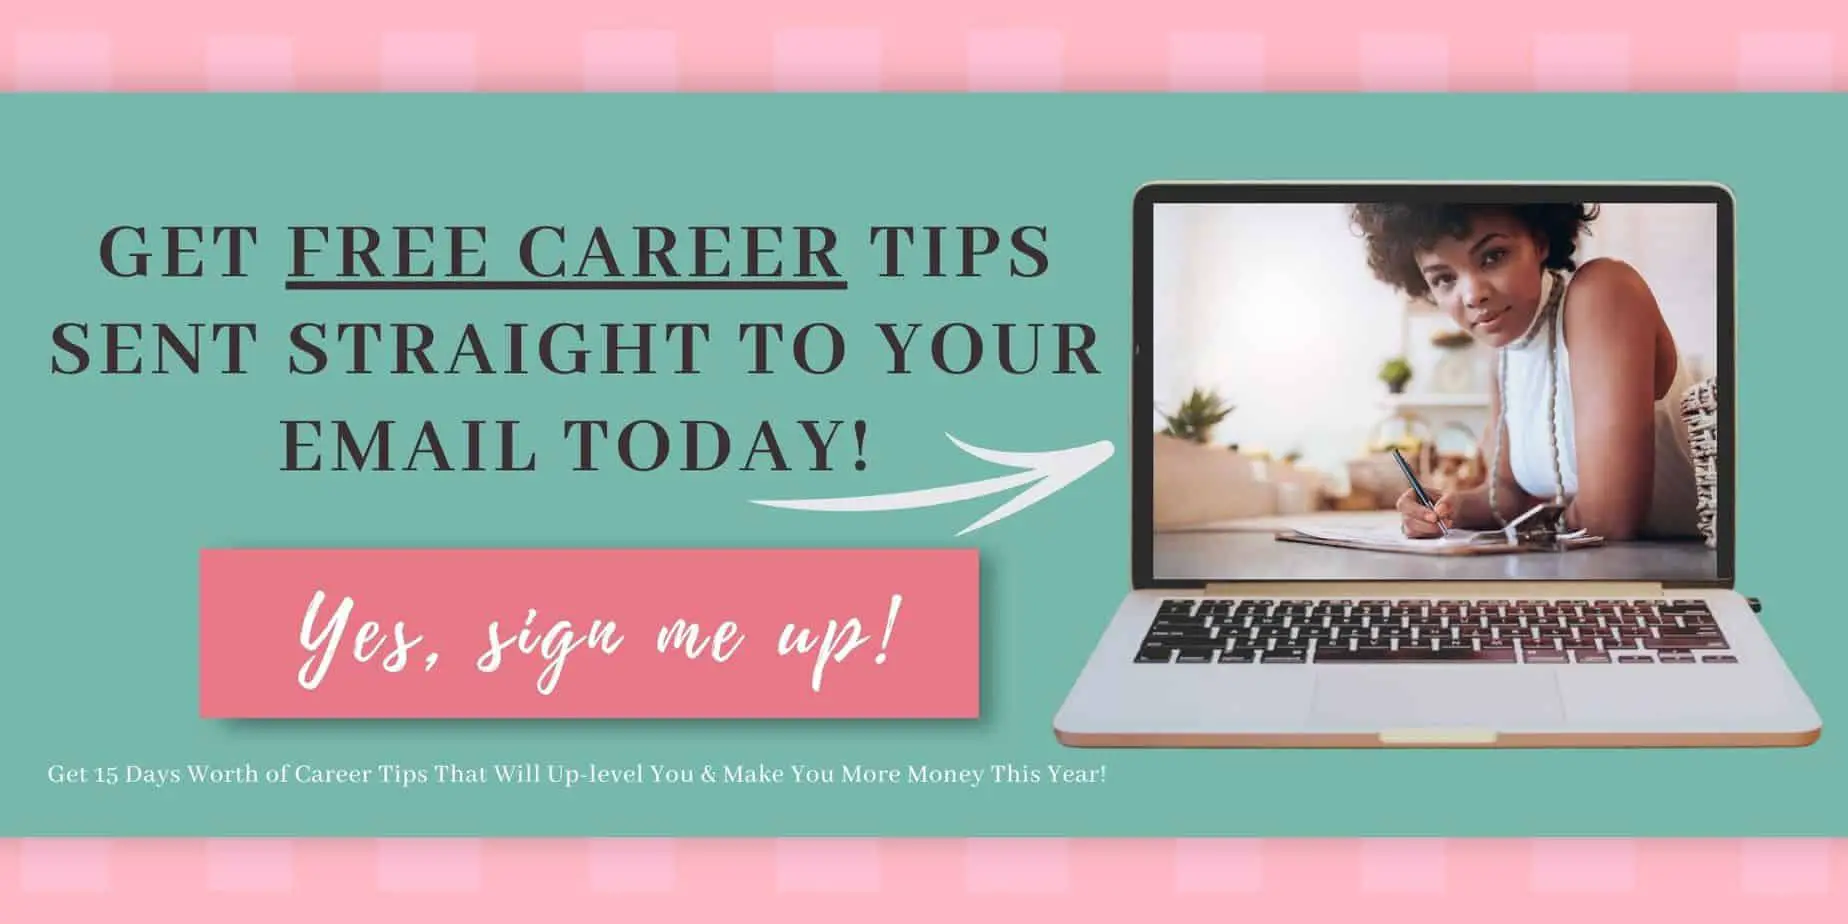 want you to sign up to receive exclusive career tips designed specifically for entrepreneurs and those looking to up-level themselves career-wise! You can sign up right here!